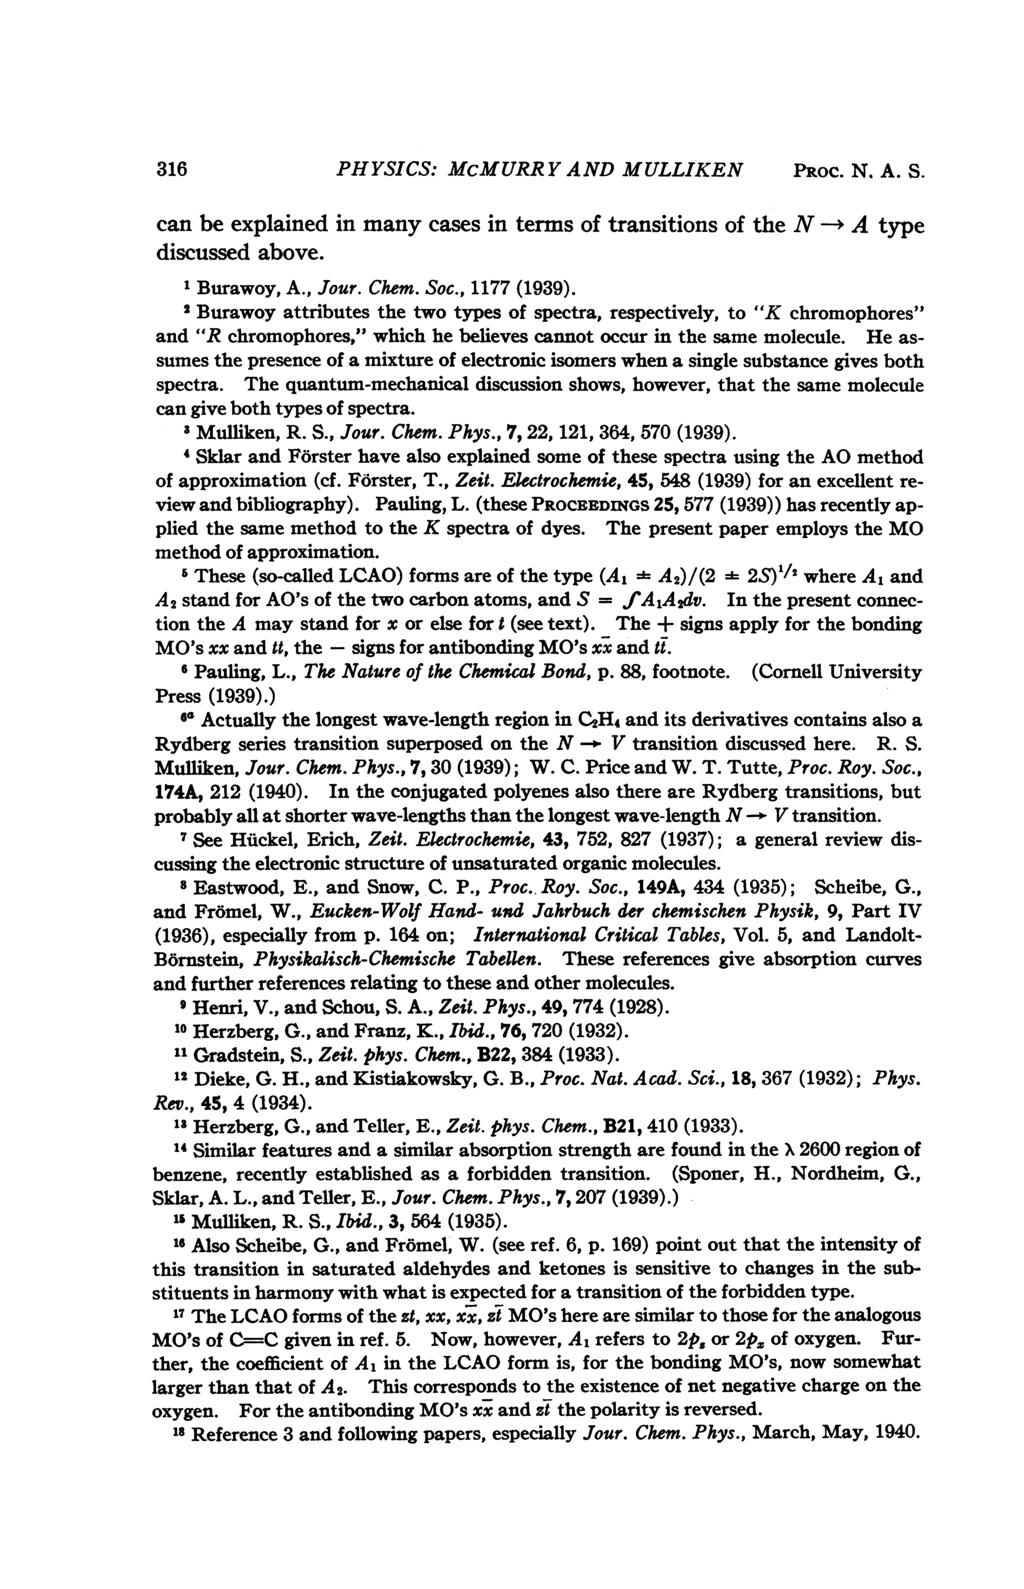 316 PHYSICS: MCMURR Y AND MULLIKEN PROC. N. A. S. can be explained in many cases in terms of transitions of the N -+ A type discussed above. 1 Burawoy, A., Jour. Chem. Soc., 1177 (1939).